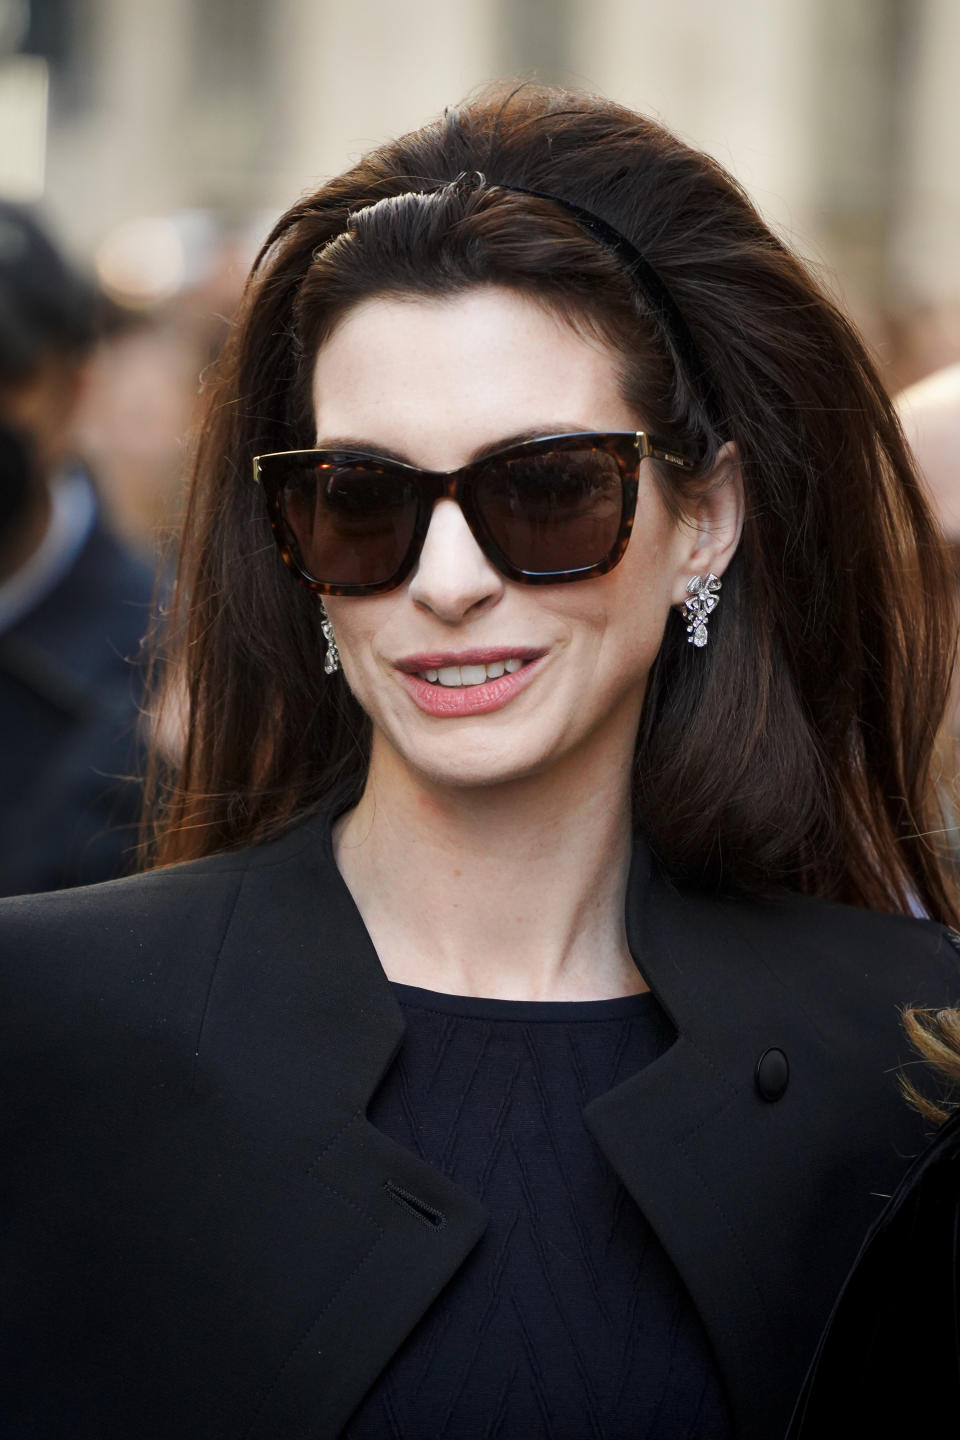 Anne Hathaway wearing sunglasses and looking down